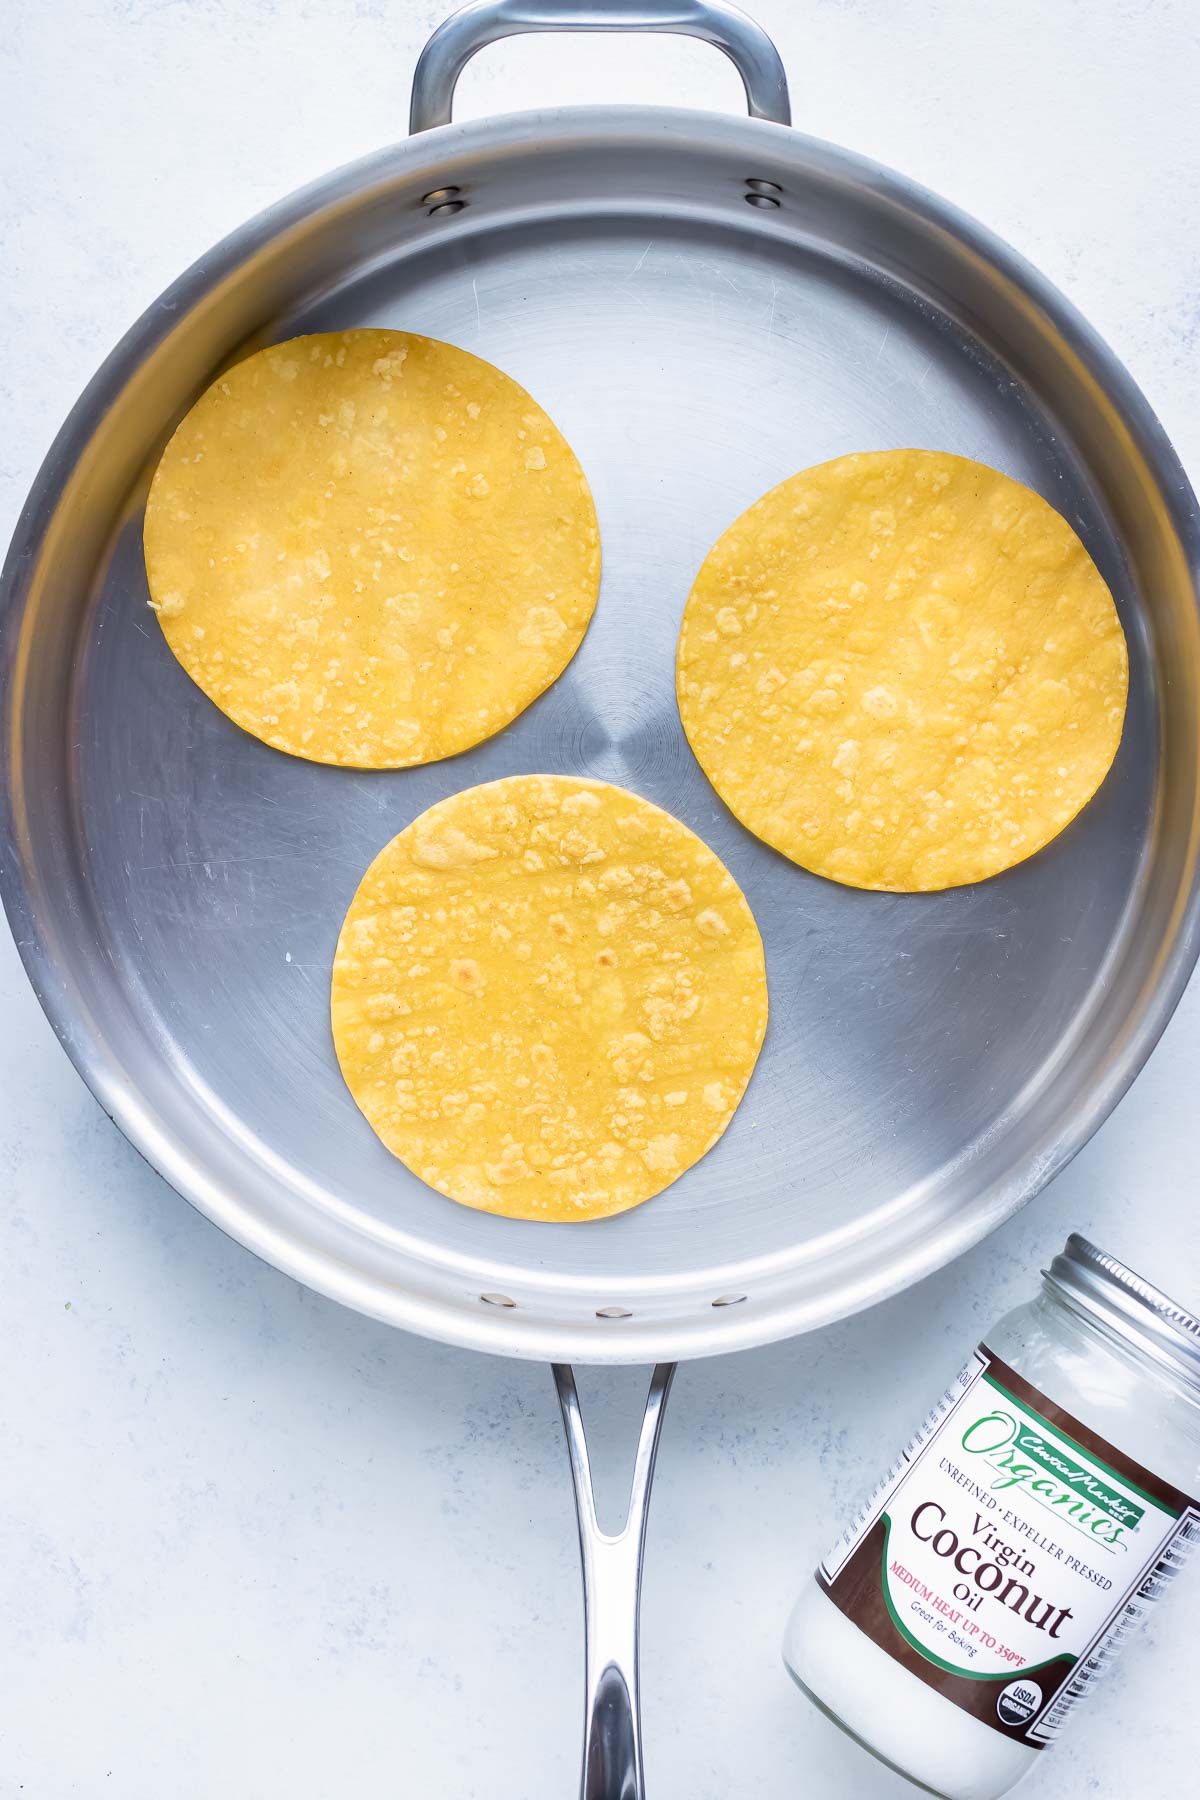 Corn tortillas are toasted in a pan.